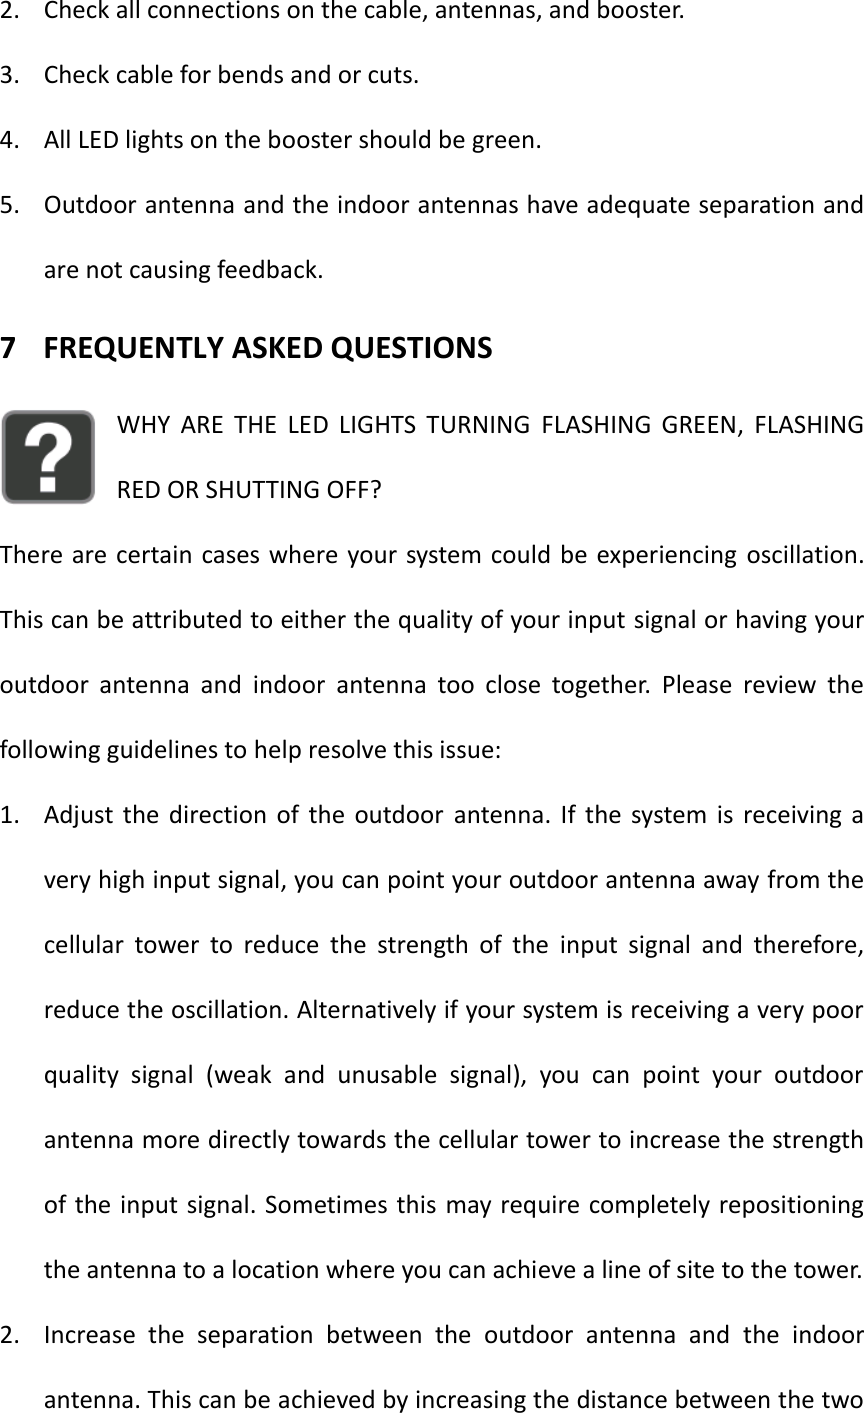 2. Check all connections on the cable, antennas, and booster. 3. Check cable for bends and or cuts. 4. All LED lights on the booster should be green. 5. Outdoor antenna and the indoor antennas have adequate separation and are not causing feedback.   7 FREQUENTLY ASKED QUESTIONS WHY  ARE  THE  LED  LIGHTS  TURNING  FLASHING  GREEN,  FLASHING RED OR SHUTTING OFF? There are certain cases where your system could be experiencing oscillation. This can be attributed to either the quality of your input signal or having your outdoor  antenna  and  indoor  antenna  too  close  together.  Please  review  the following guidelines to help resolve this issue: 1. Adjust the  direction  of  the  outdoor  antenna.  If  the  system is  receiving  a very high input signal, you can point your outdoor antenna away from the cellular  tower  to  reduce  the  strength  of  the  input  signal  and  therefore, reduce the oscillation. Alternatively if your system is receiving a very poor quality  signal  (weak  and  unusable  signal),  you  can  point  your  outdoor antenna more directly towards the cellular tower to increase the strength of the input signal. Sometimes this may require completely repositioning the antenna to a location where you can achieve a line of site to the tower.   2. Increase  the  separation  between  the  outdoor  antenna  and  the  indoor antenna. This can be achieved by increasing the distance between the two 